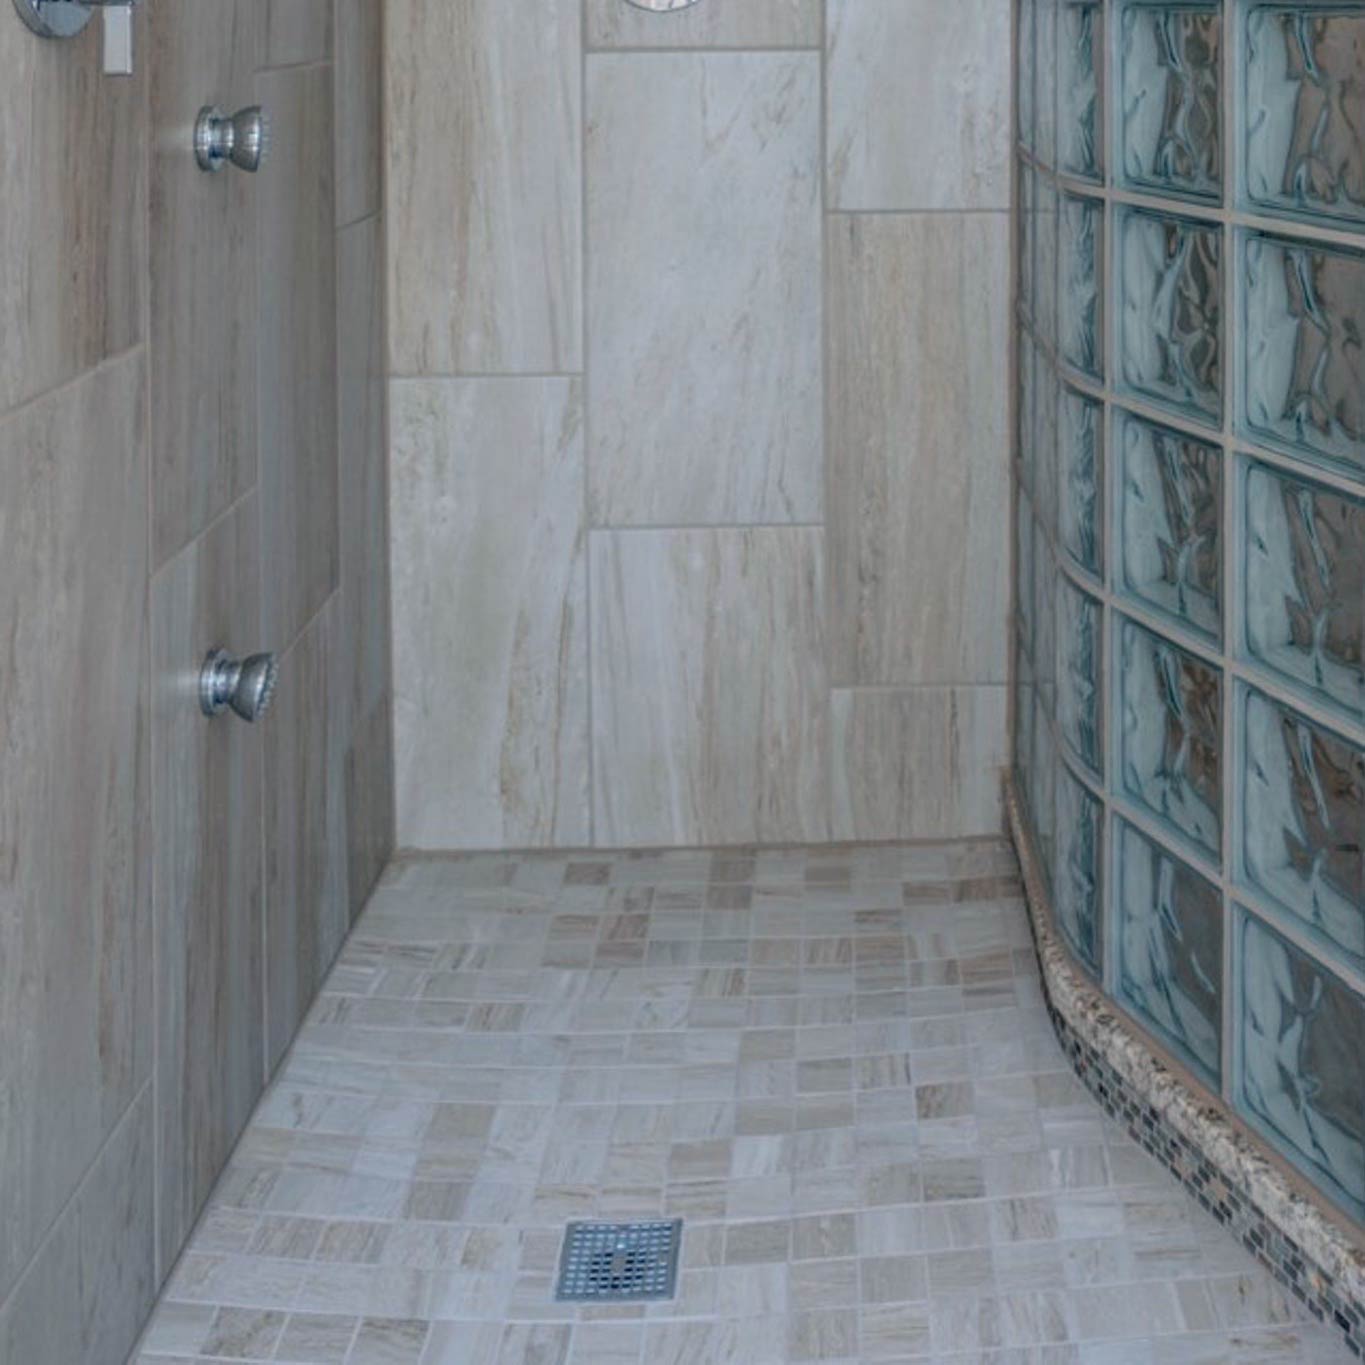 Square drain in a ready for tile glass block curved shower with 2 inch by 2 inch tiles - Innovate Building Solutions 